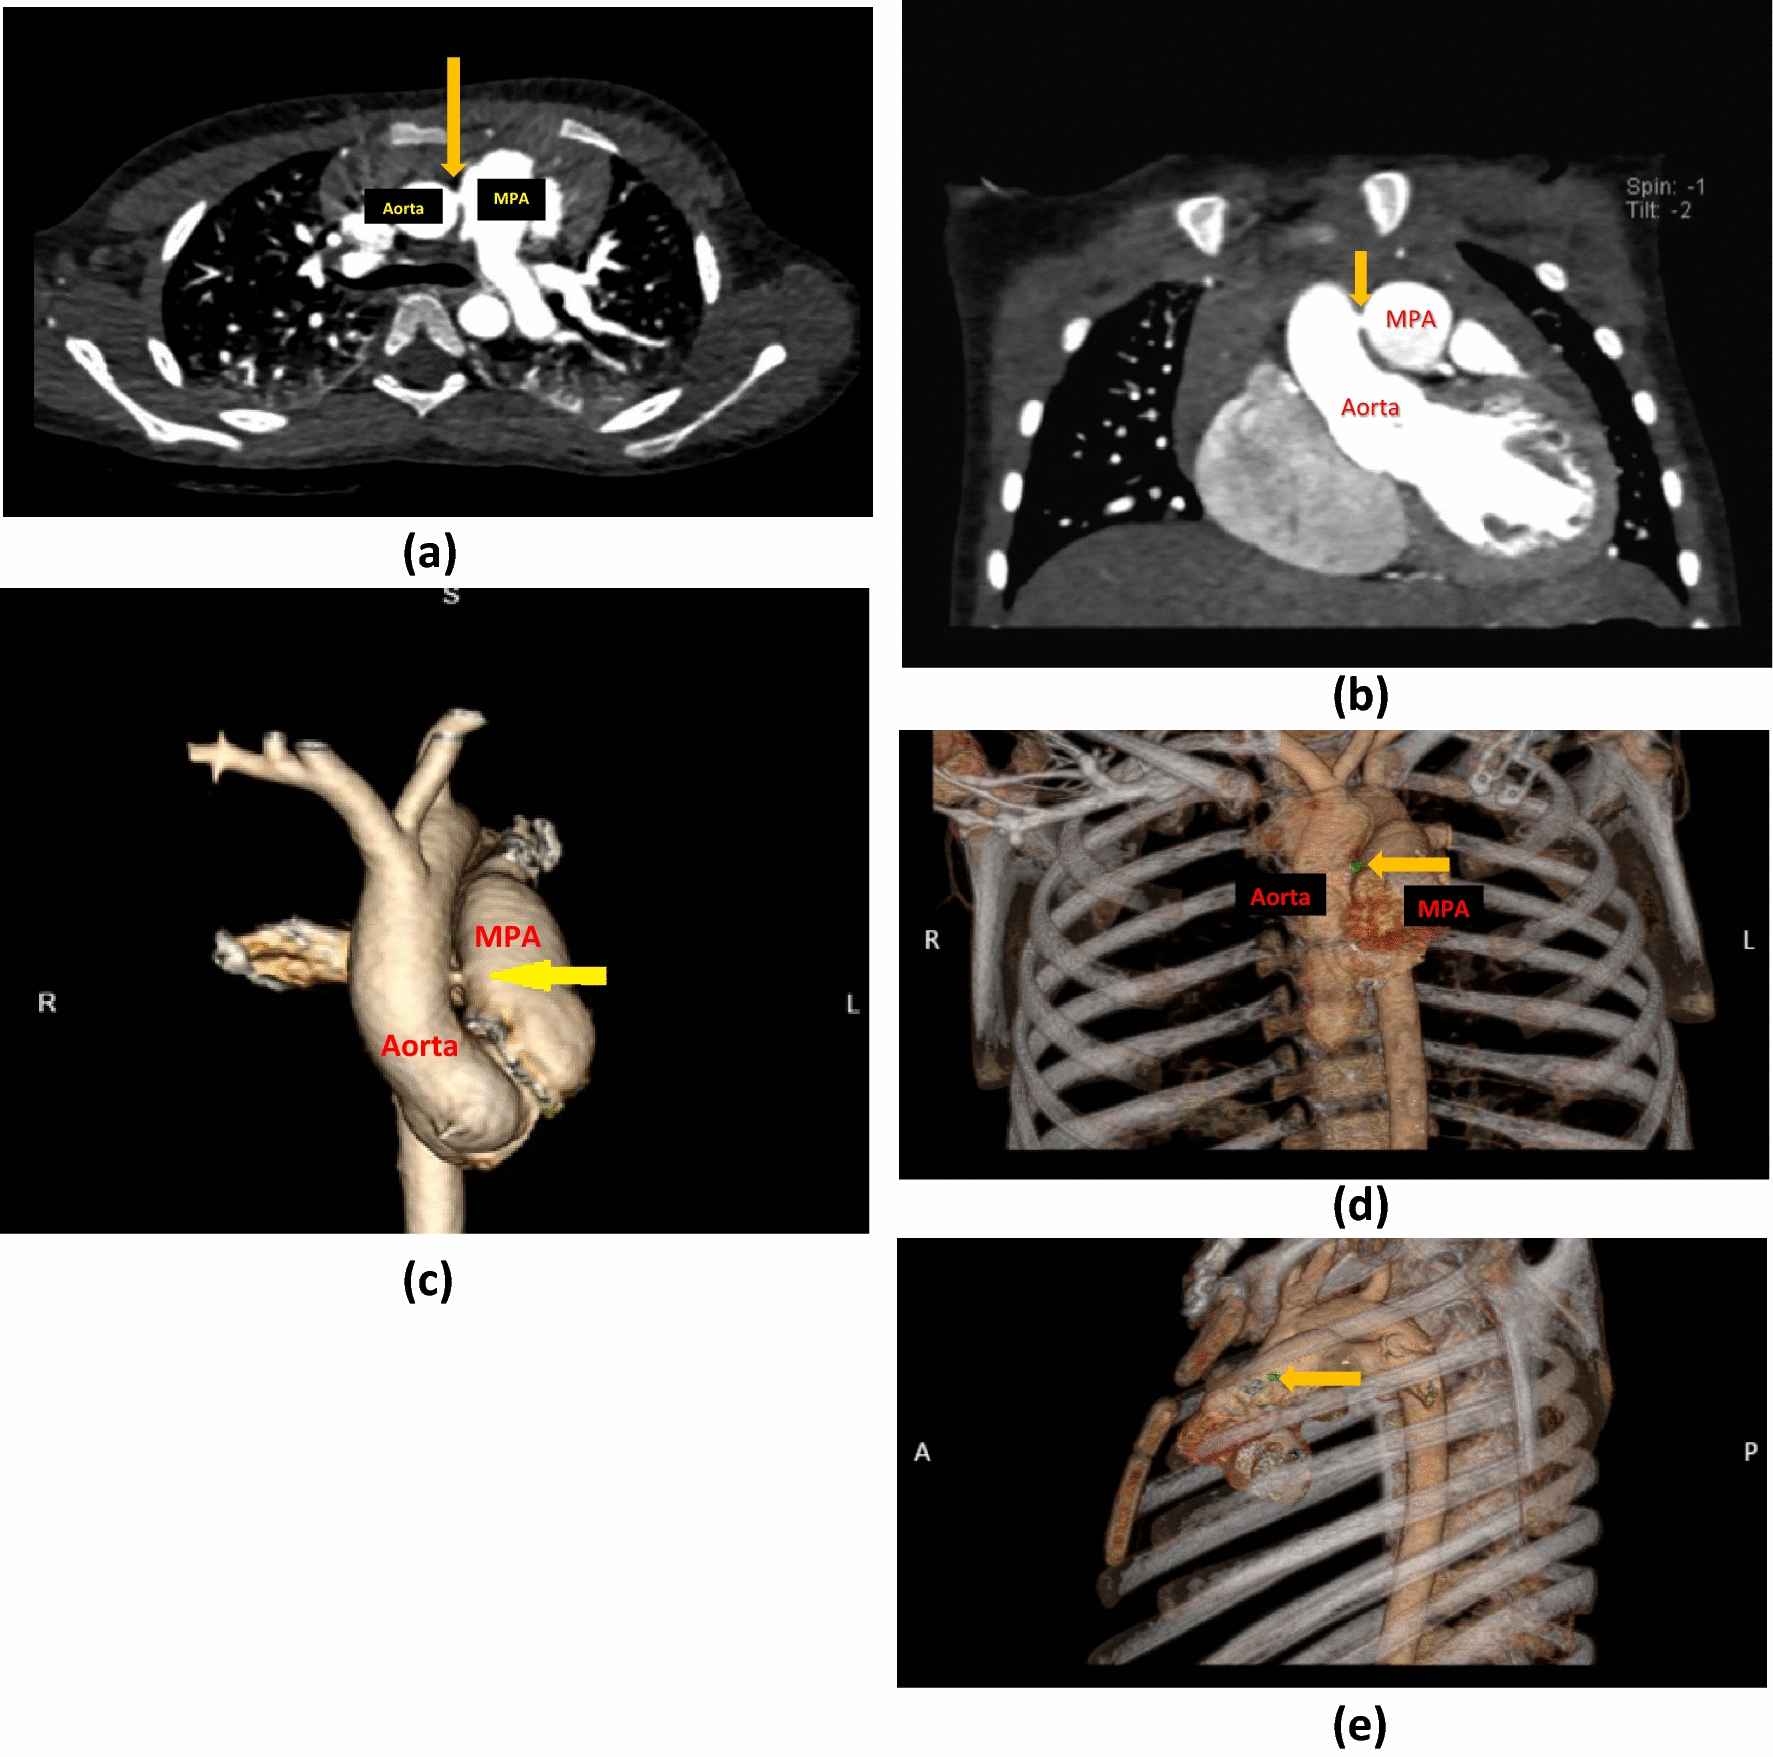 3D Echocardiographic and Computed Tomographic Angiography Guidance for Percutaneous Closure of a Type II (Intermediate) Aortopulmonary Window